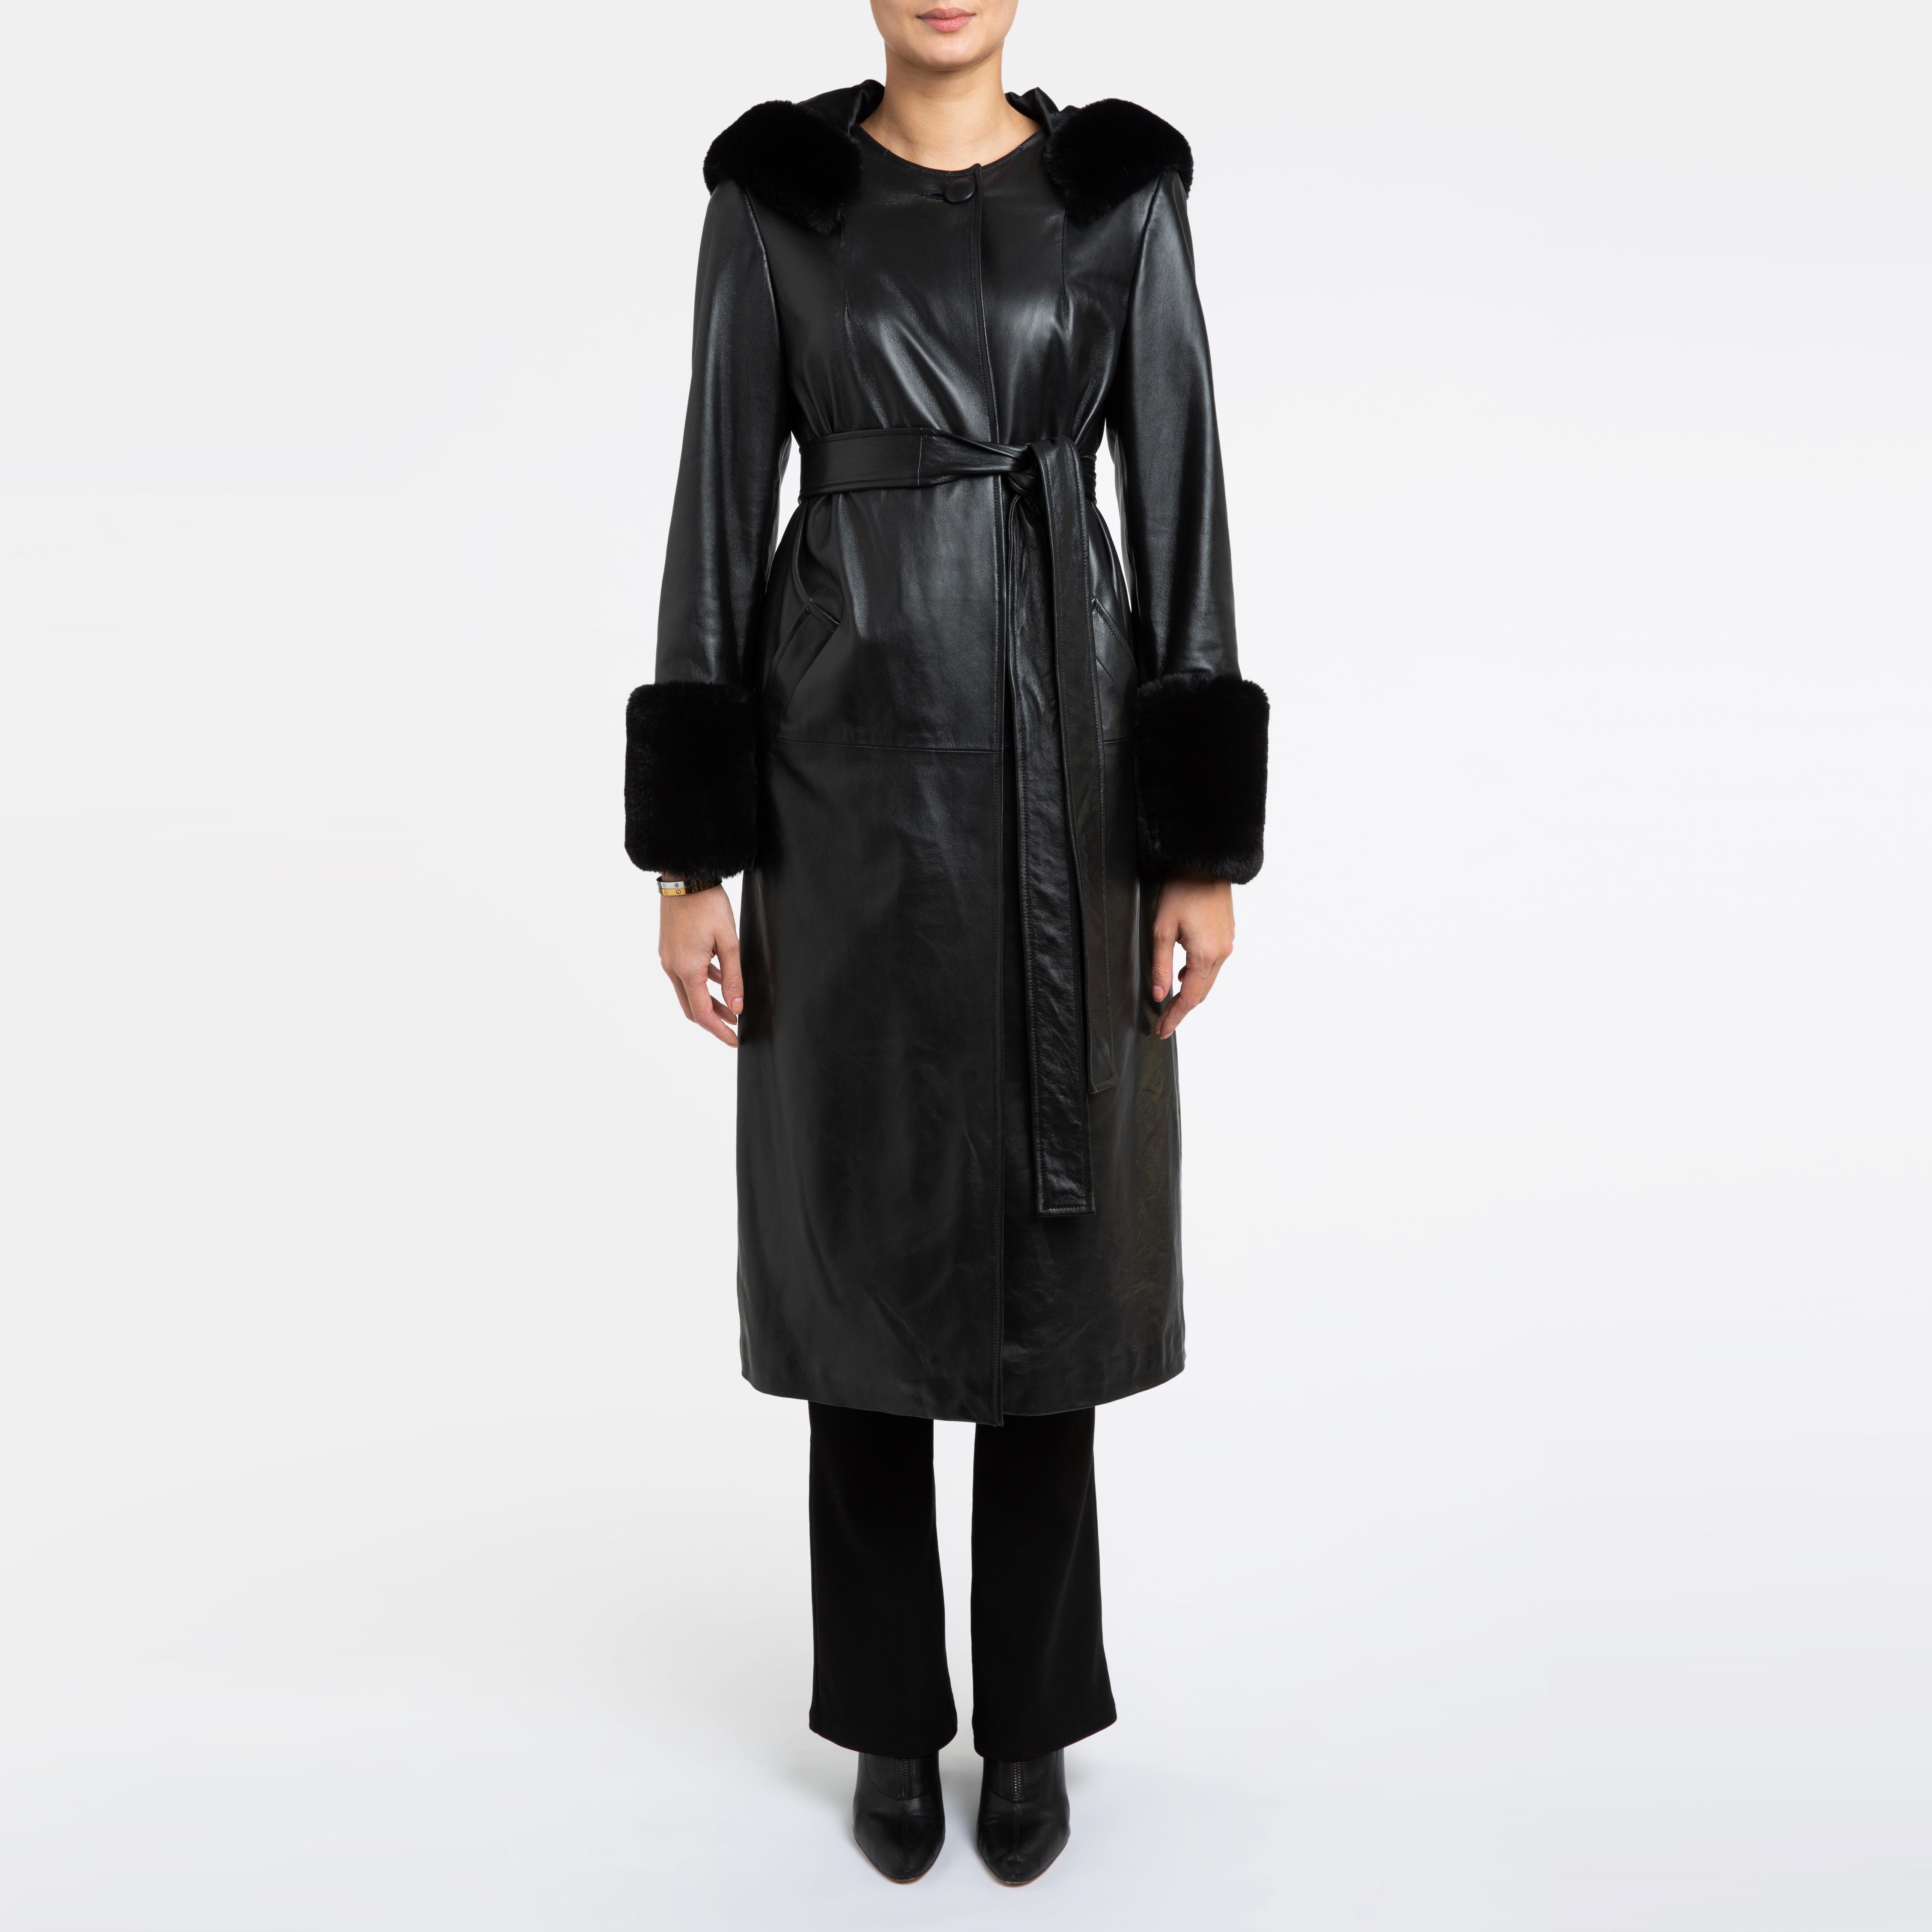 Verheyen London Hooded Leather Trench Coat in Black with Faux Fur - Size uk 12

Handmade in London, made with 100% Italian Lambs Leather and the highest quality of faux fur to match, this luxury item is an investment piece to wear for a lifetime.